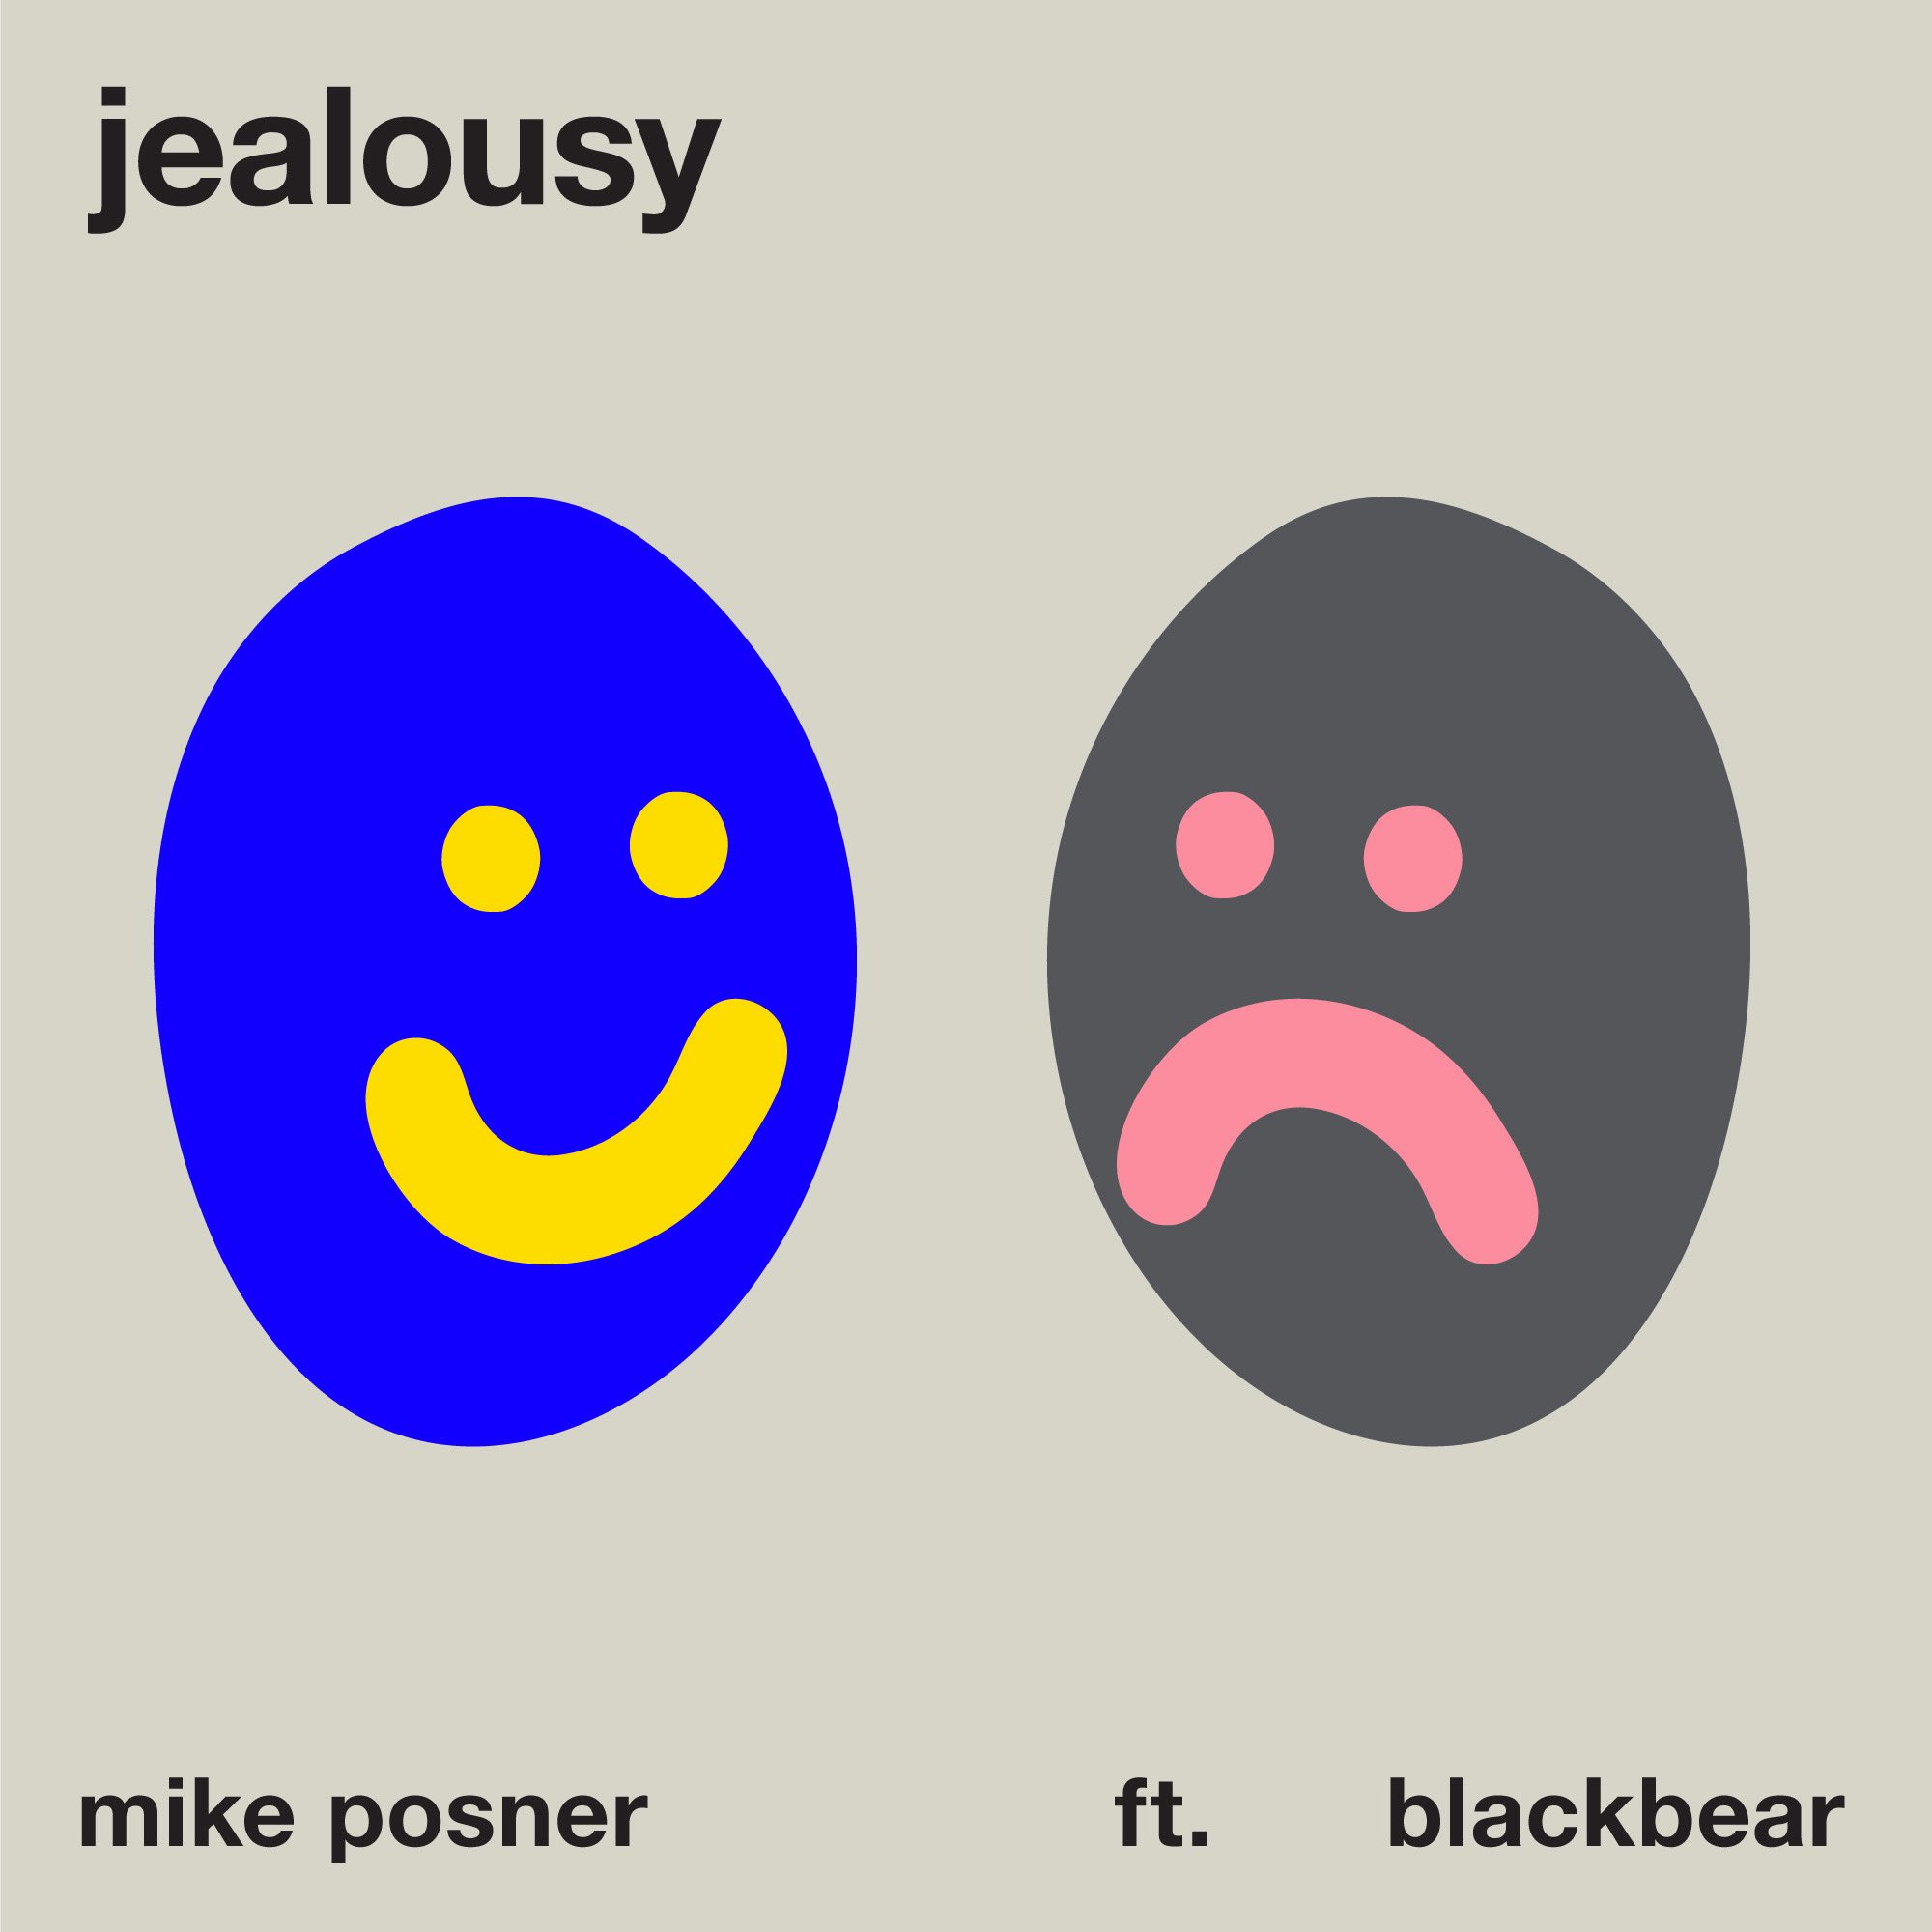 Mike Posner - Jealousy (feat. blackbear)
Released: May 21, 2021 
Label: Monster Mountain, Arista Records
